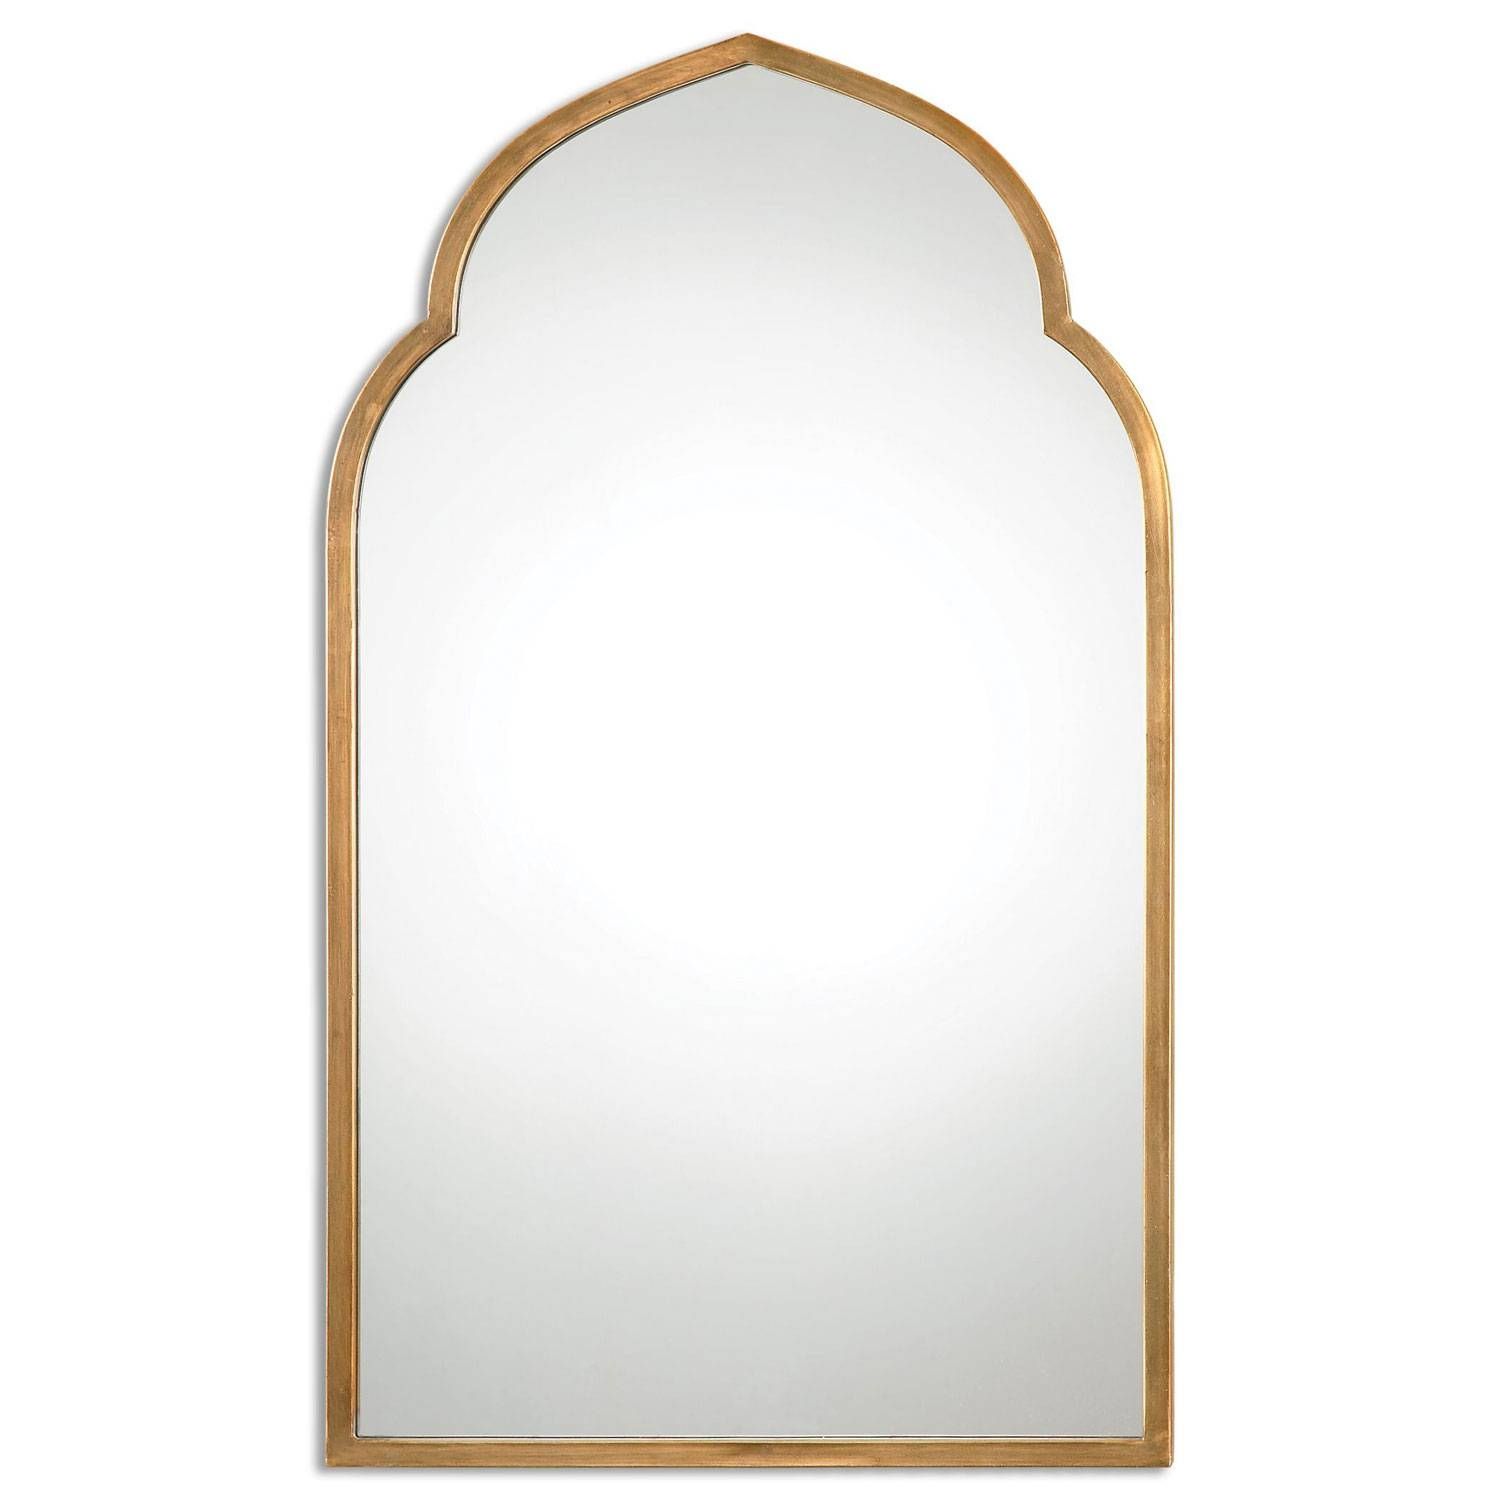 Kenitra Gold Arch Mirror Uttermost Wall Mirror Mirrors Home Decor Throughout Arched Mirrors (View 10 of 25)